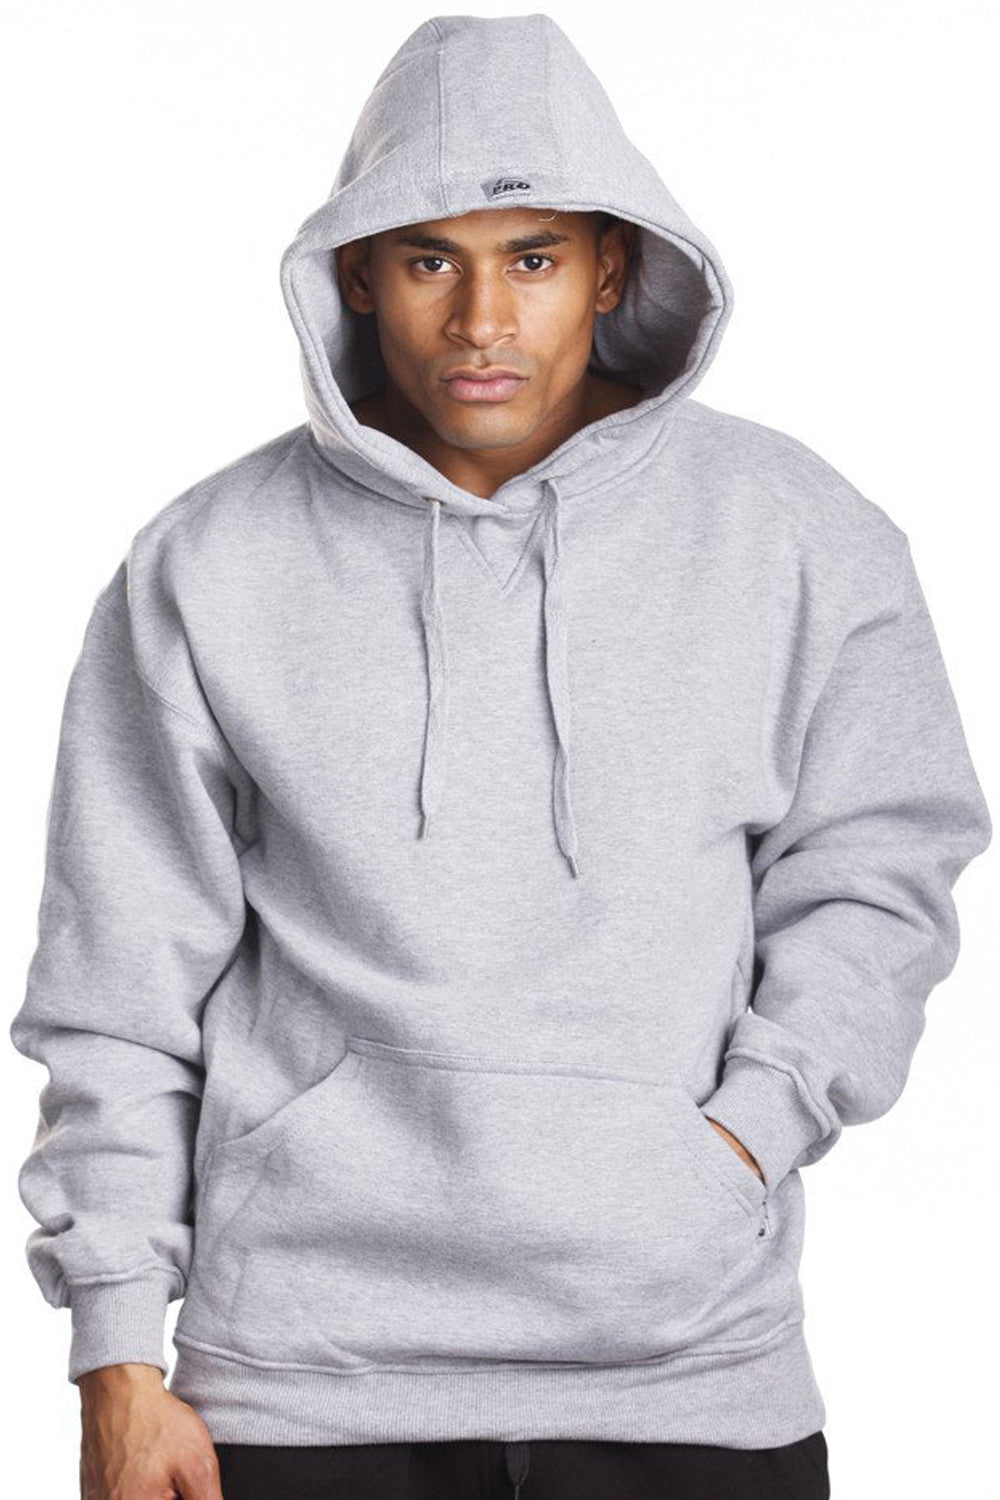 Fleece Heather Grey Pullover hoodie: Versatile & cozy. Double-lined hood. Loose fit tip: opt one size down for snugness. Sizes: 2XL-5XL. Colors: Black, Heather Grey, Dark Grey, Navy